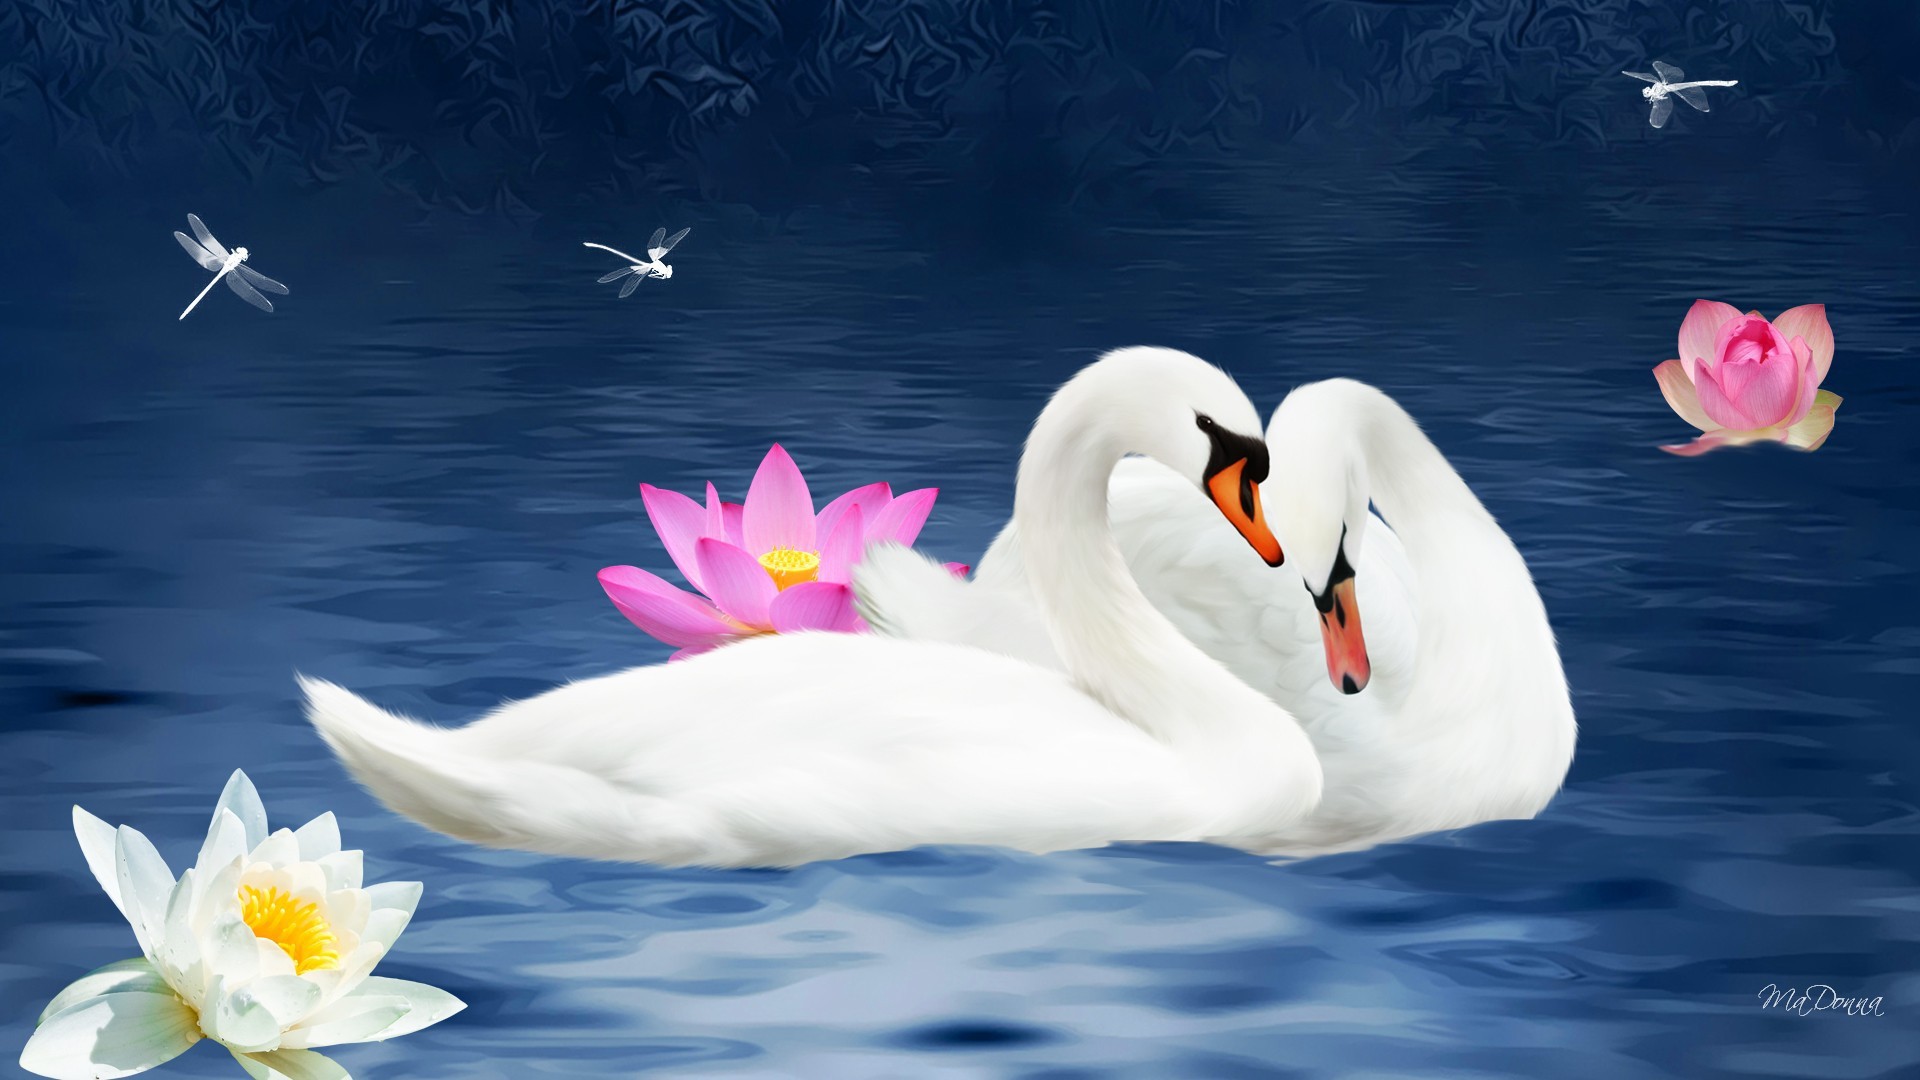 Swans in Love by MaDonna